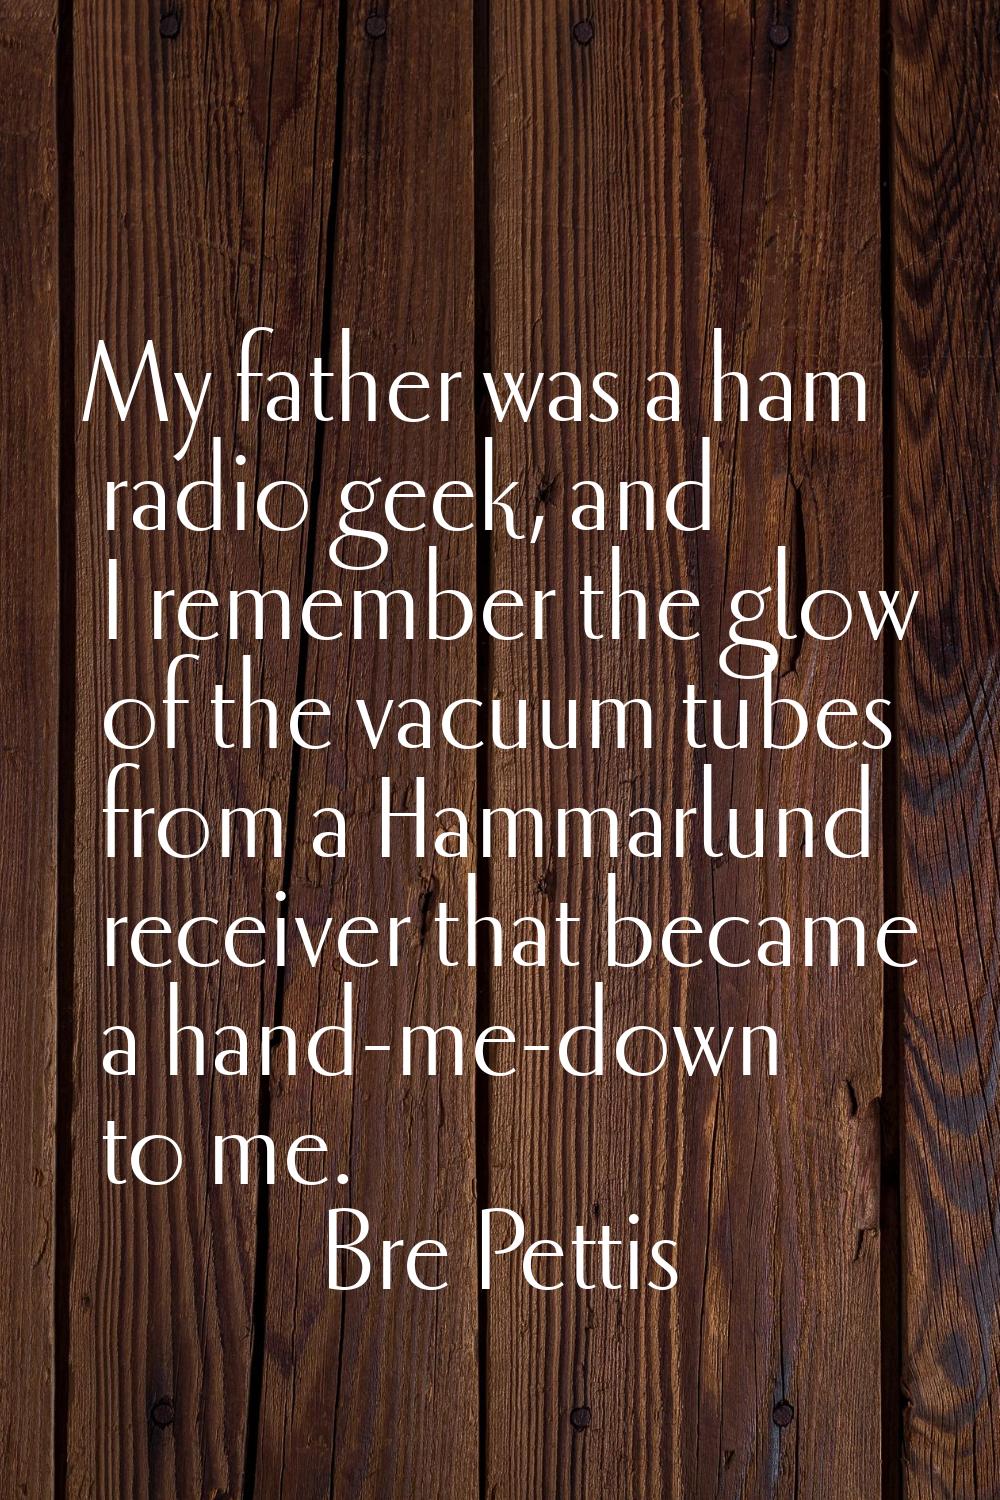 My father was a ham radio geek, and I remember the glow of the vacuum tubes from a Hammarlund recei